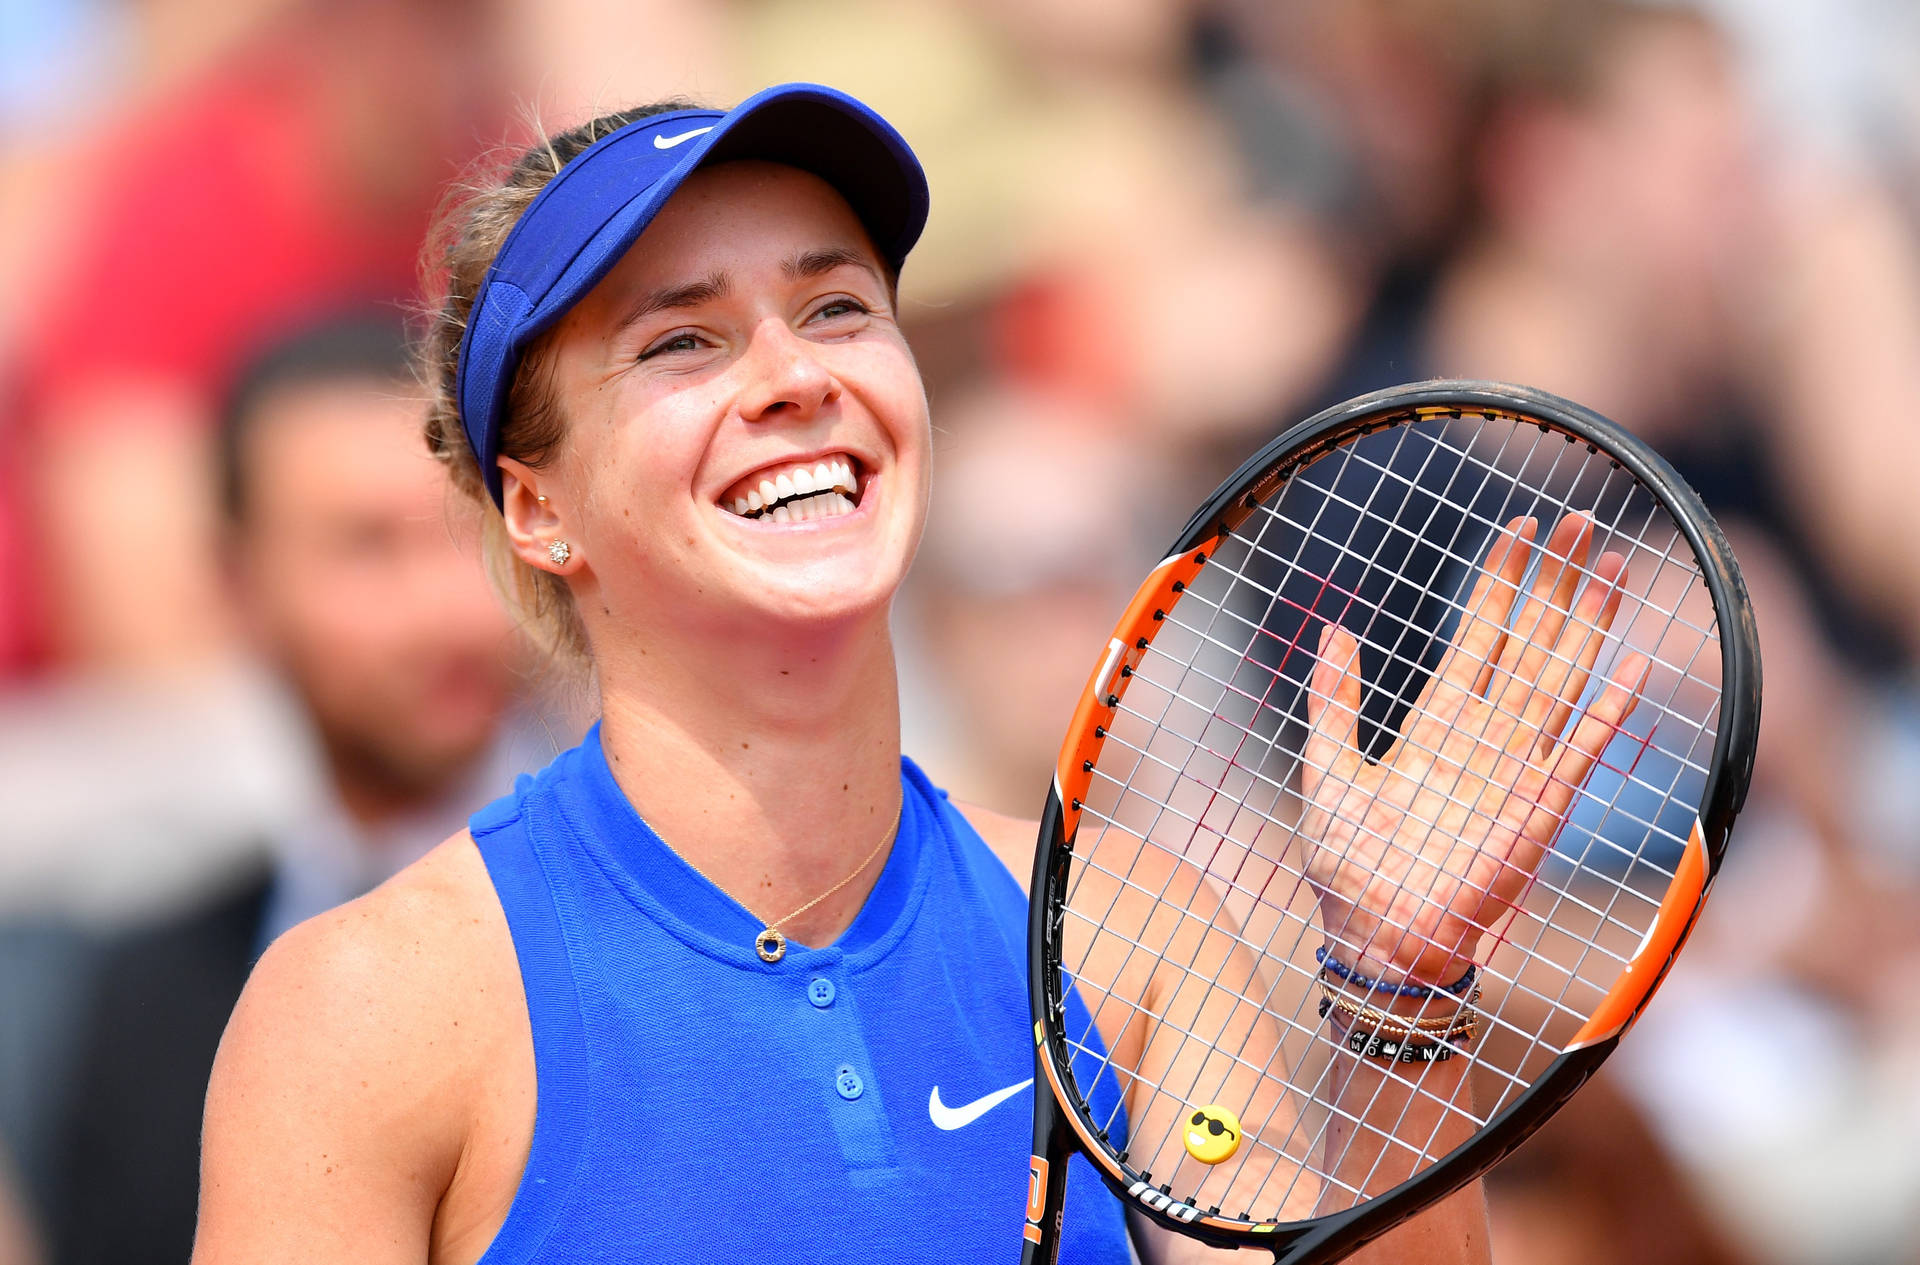 Elina Svitolina Holding a Tennis Racket With a Smile Wallpaper